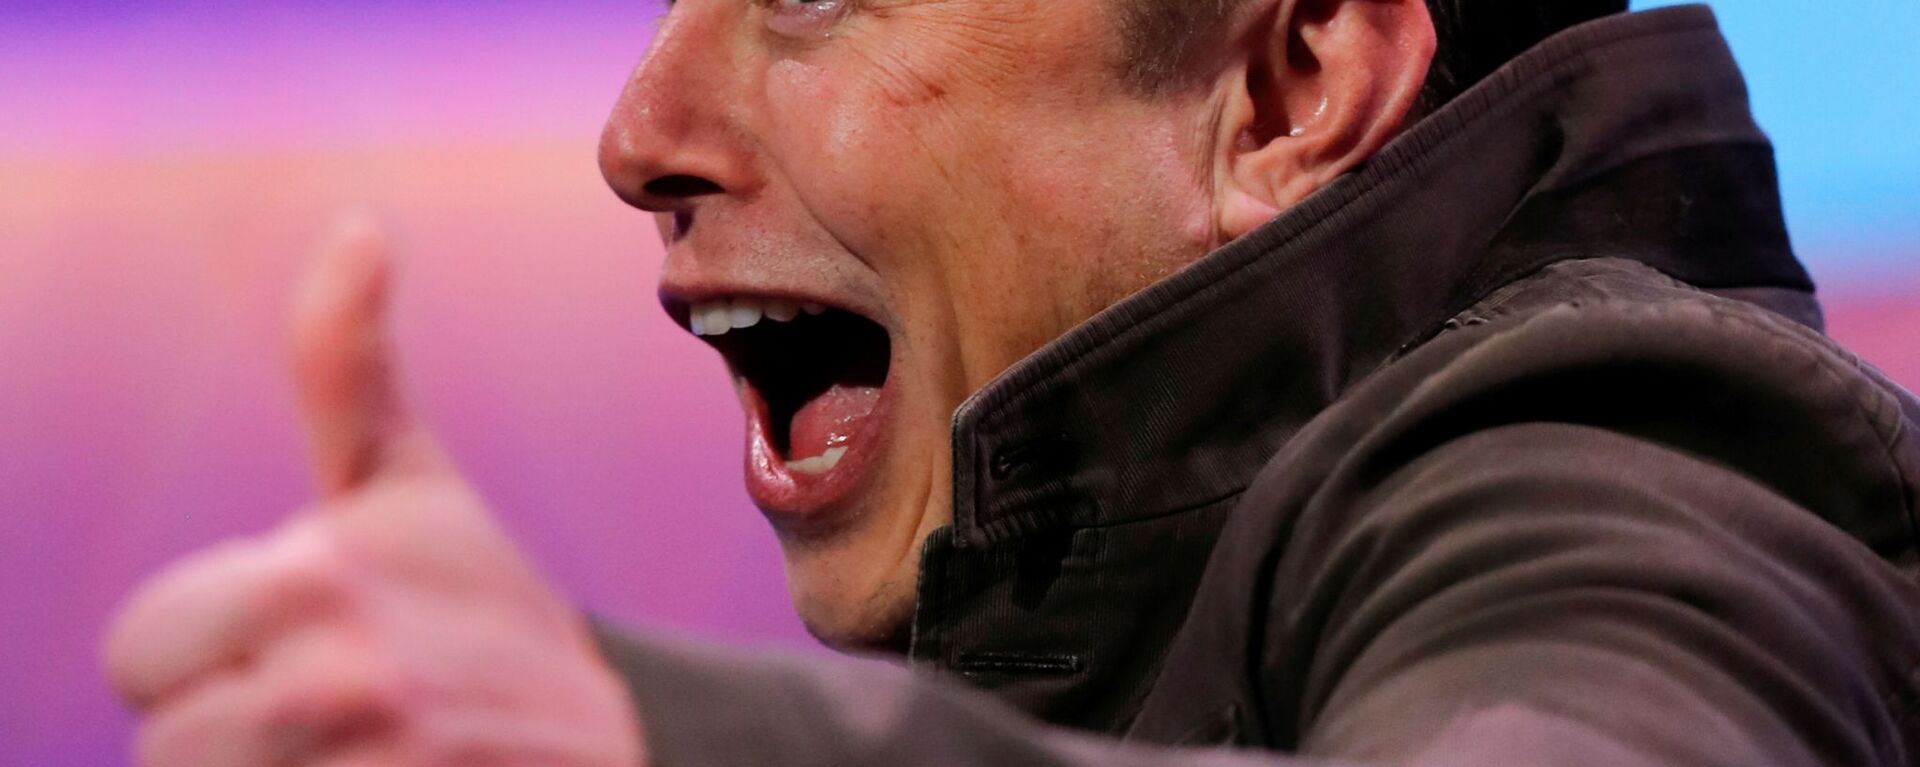 SpaceX owner and Tesla CEO Elon Musk gestures during a conversation with legendary game designer Todd Howard (not pictured) at the E3 gaming convention in Los Angeles, California, U.S., June 13, 2019 - Sputnik International, 1920, 28.09.2021